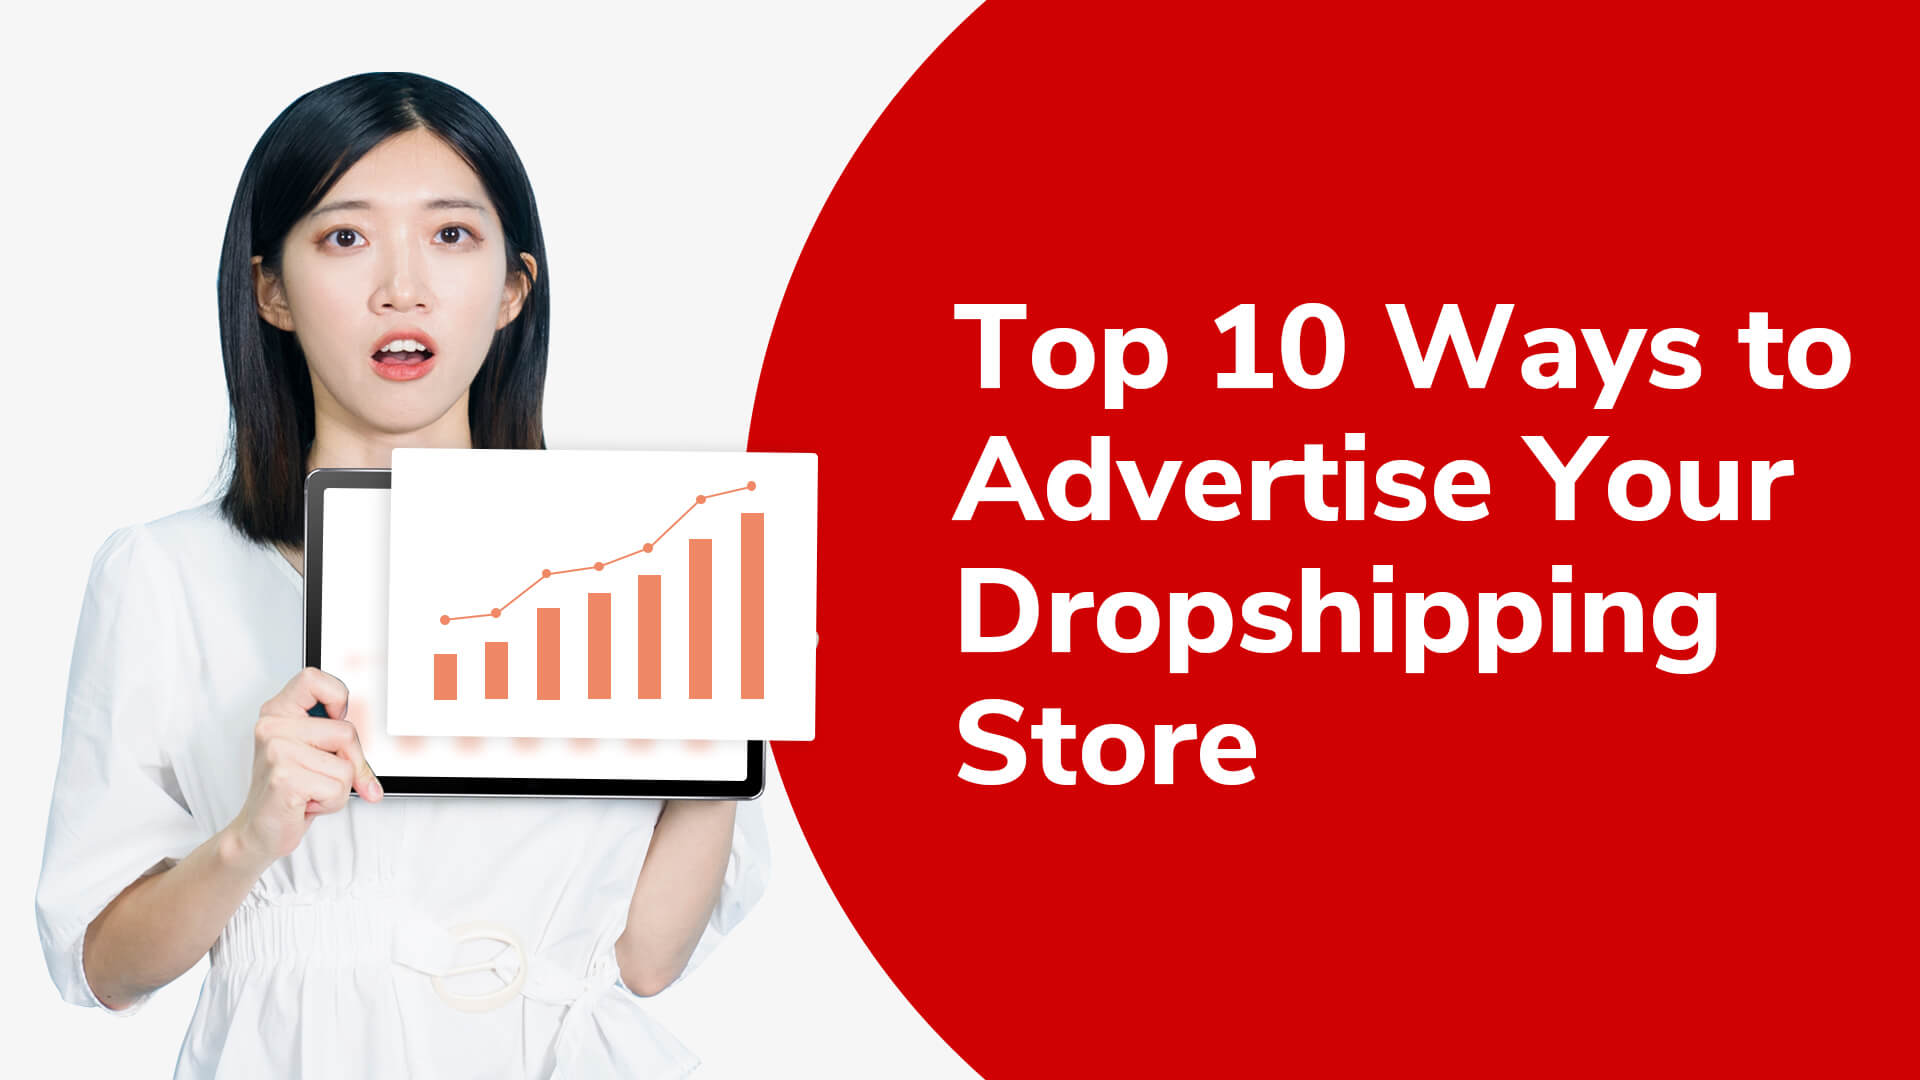 Top 10 Ways to Advertise Your Dropshipping Store